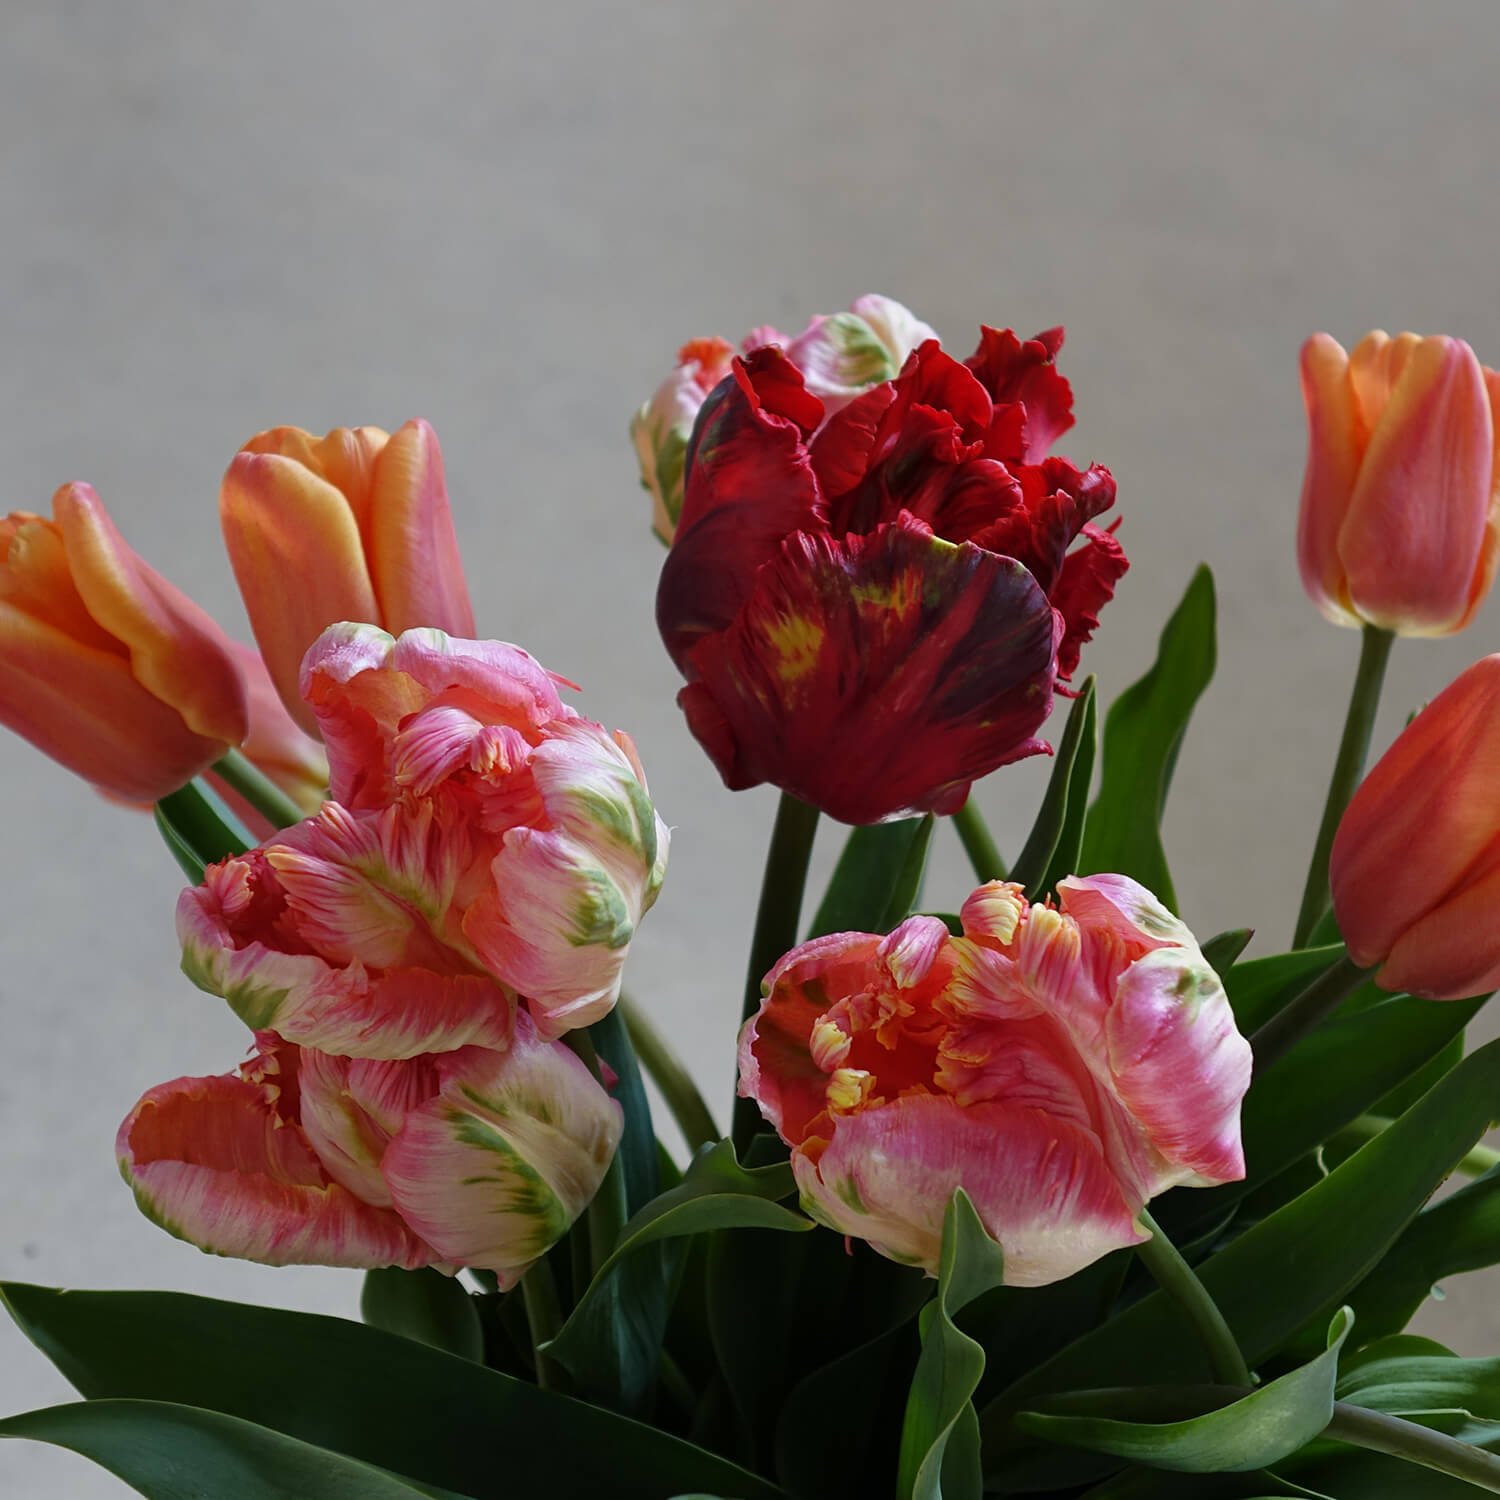 Parrot Tulips Mixed Spring Flowers.jpg